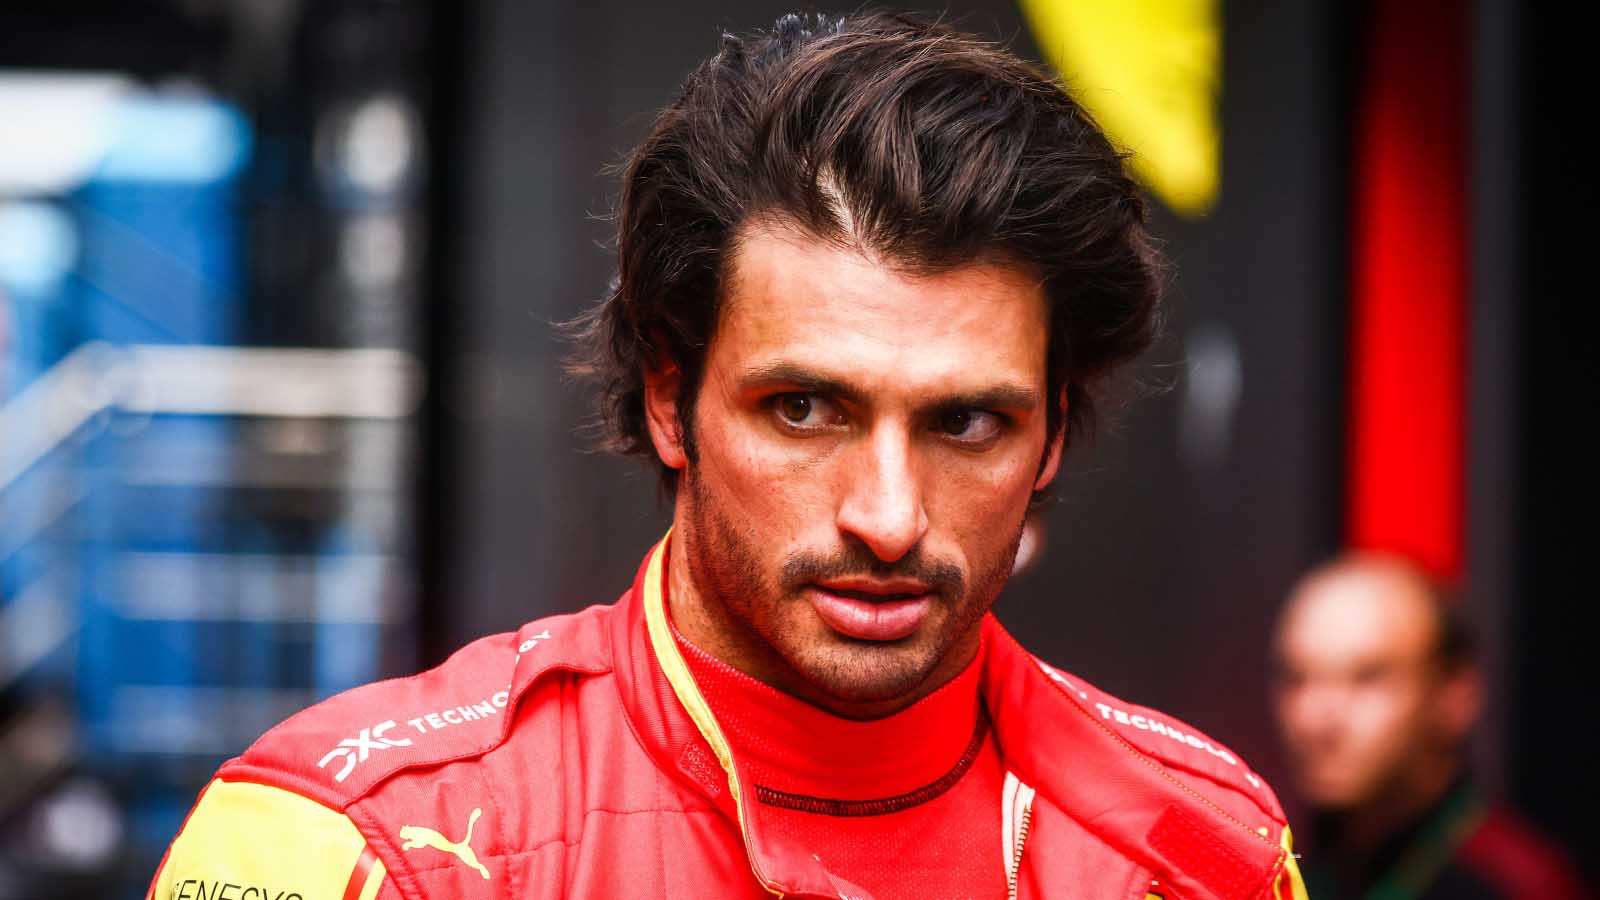 Carlos Sainz speaks out after chasing down thieves in attempted robbery